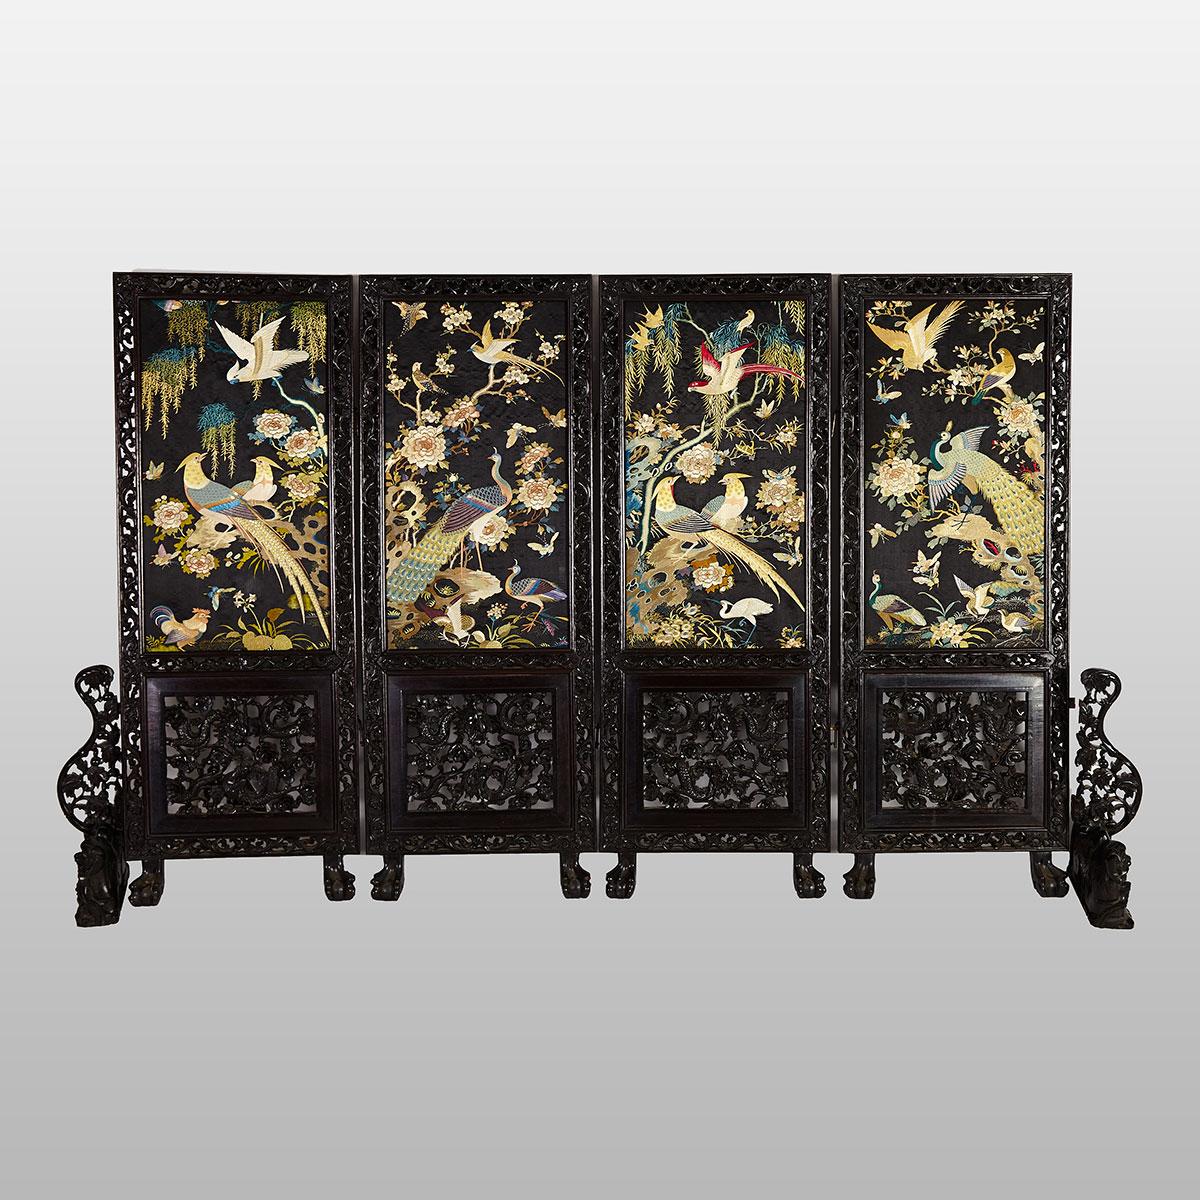 Four Panel Screen with Silk Embroideries, First Half 20th Century